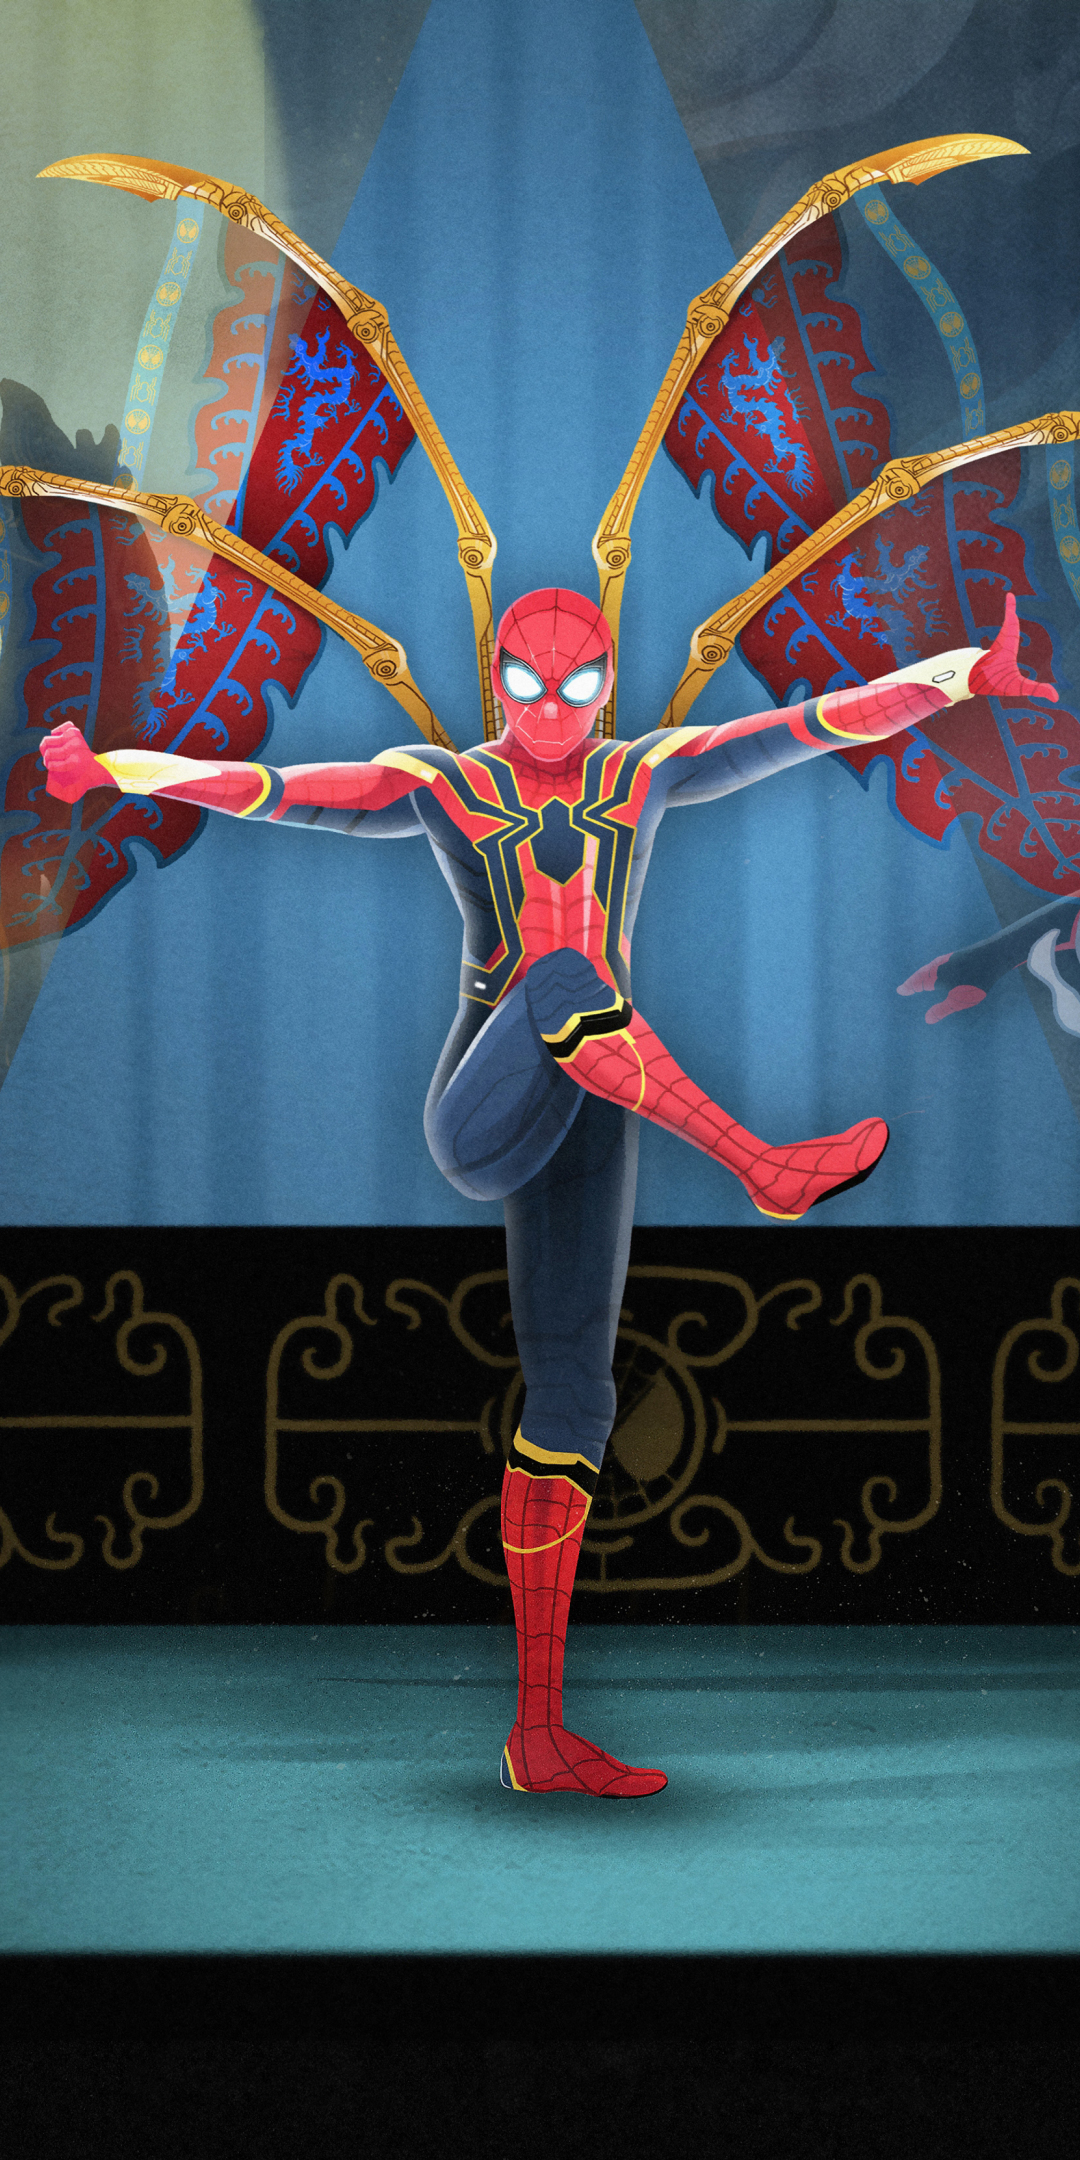 Spider-man: Far From Home, Iron-spider, stealth suit, 2019, 1080x2160 wallpaper